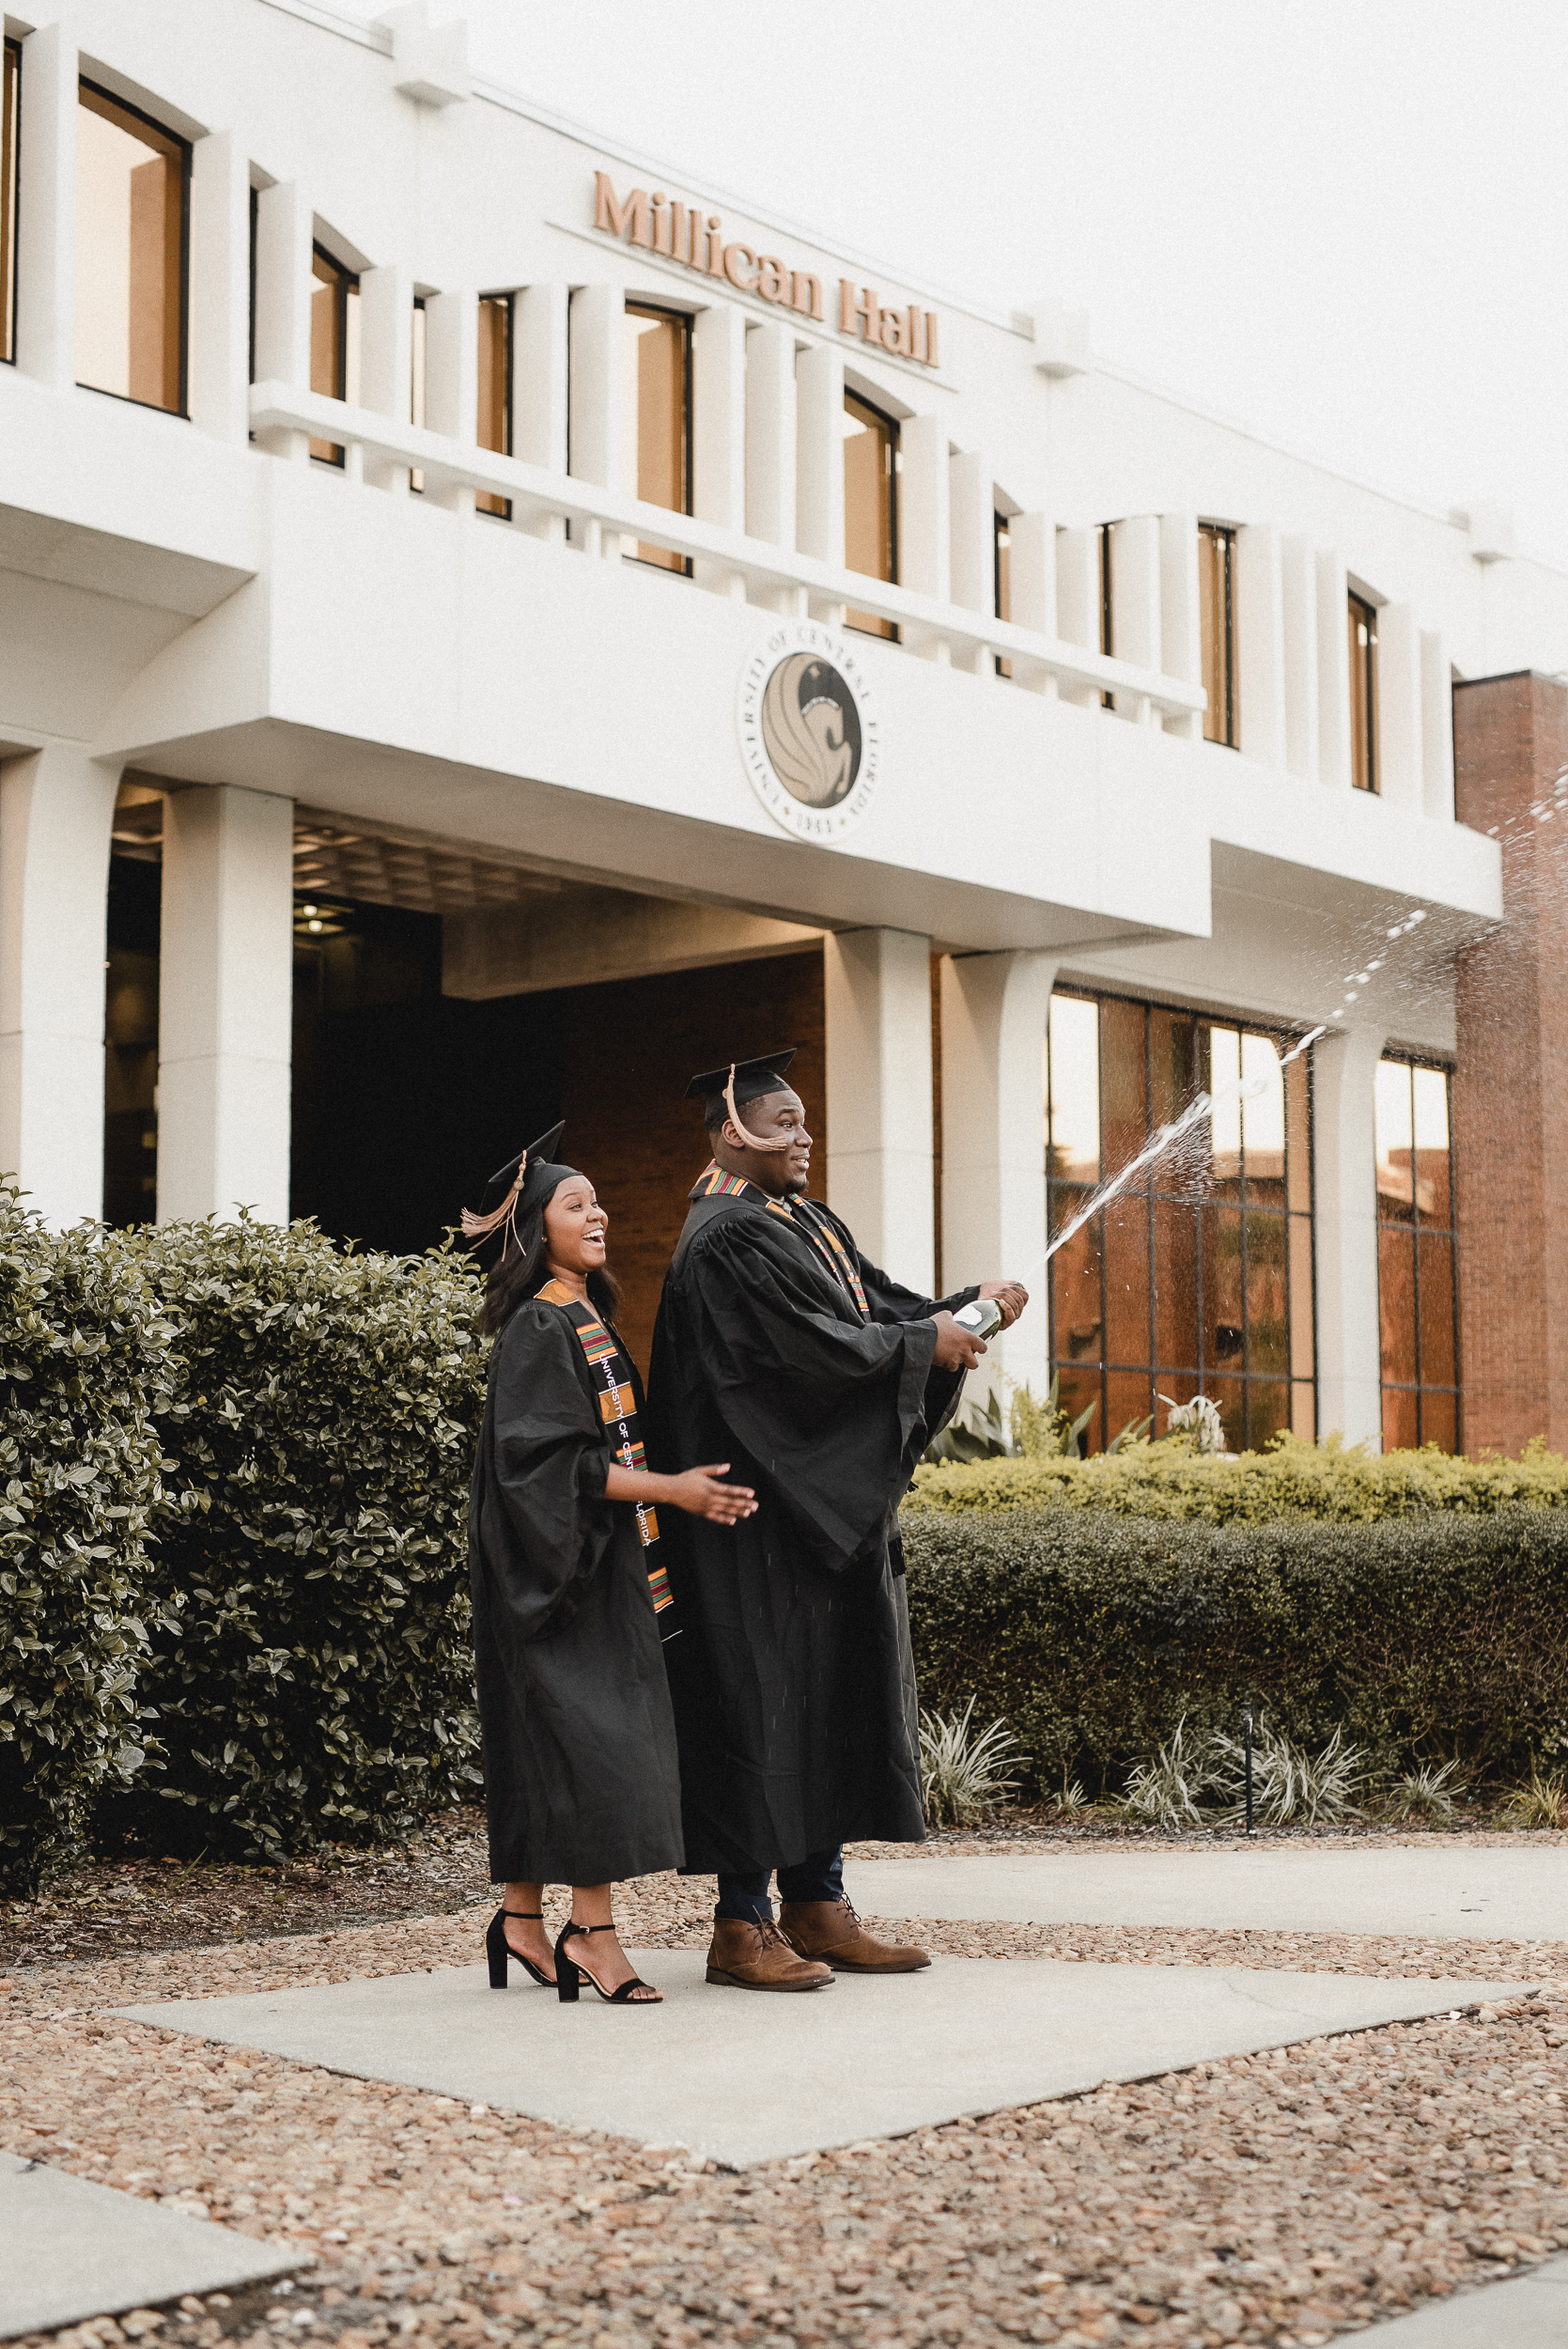 ucf orlando graduation photographer local packages